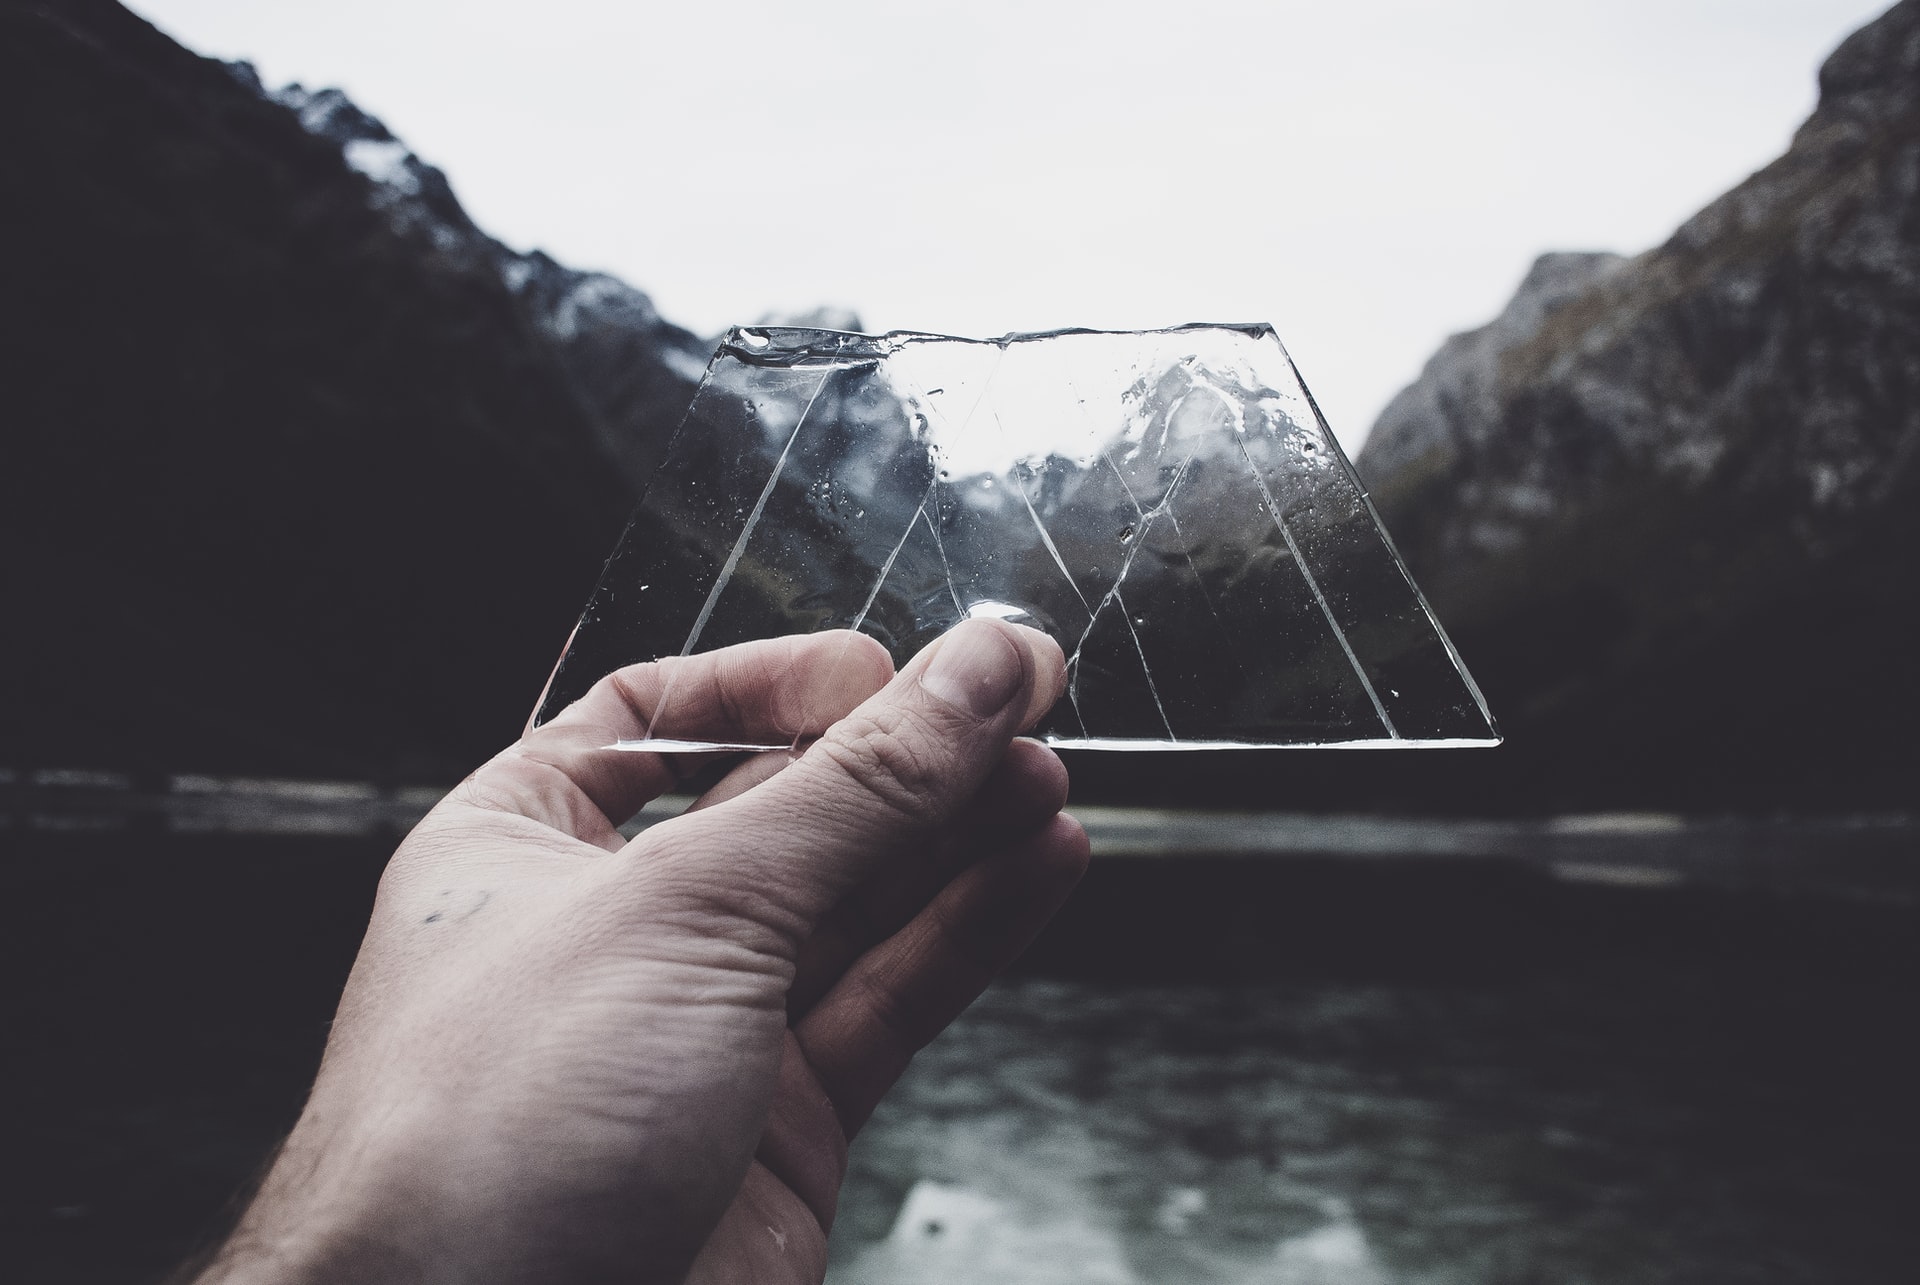 A piece of glass being held against a mountainous backdrop